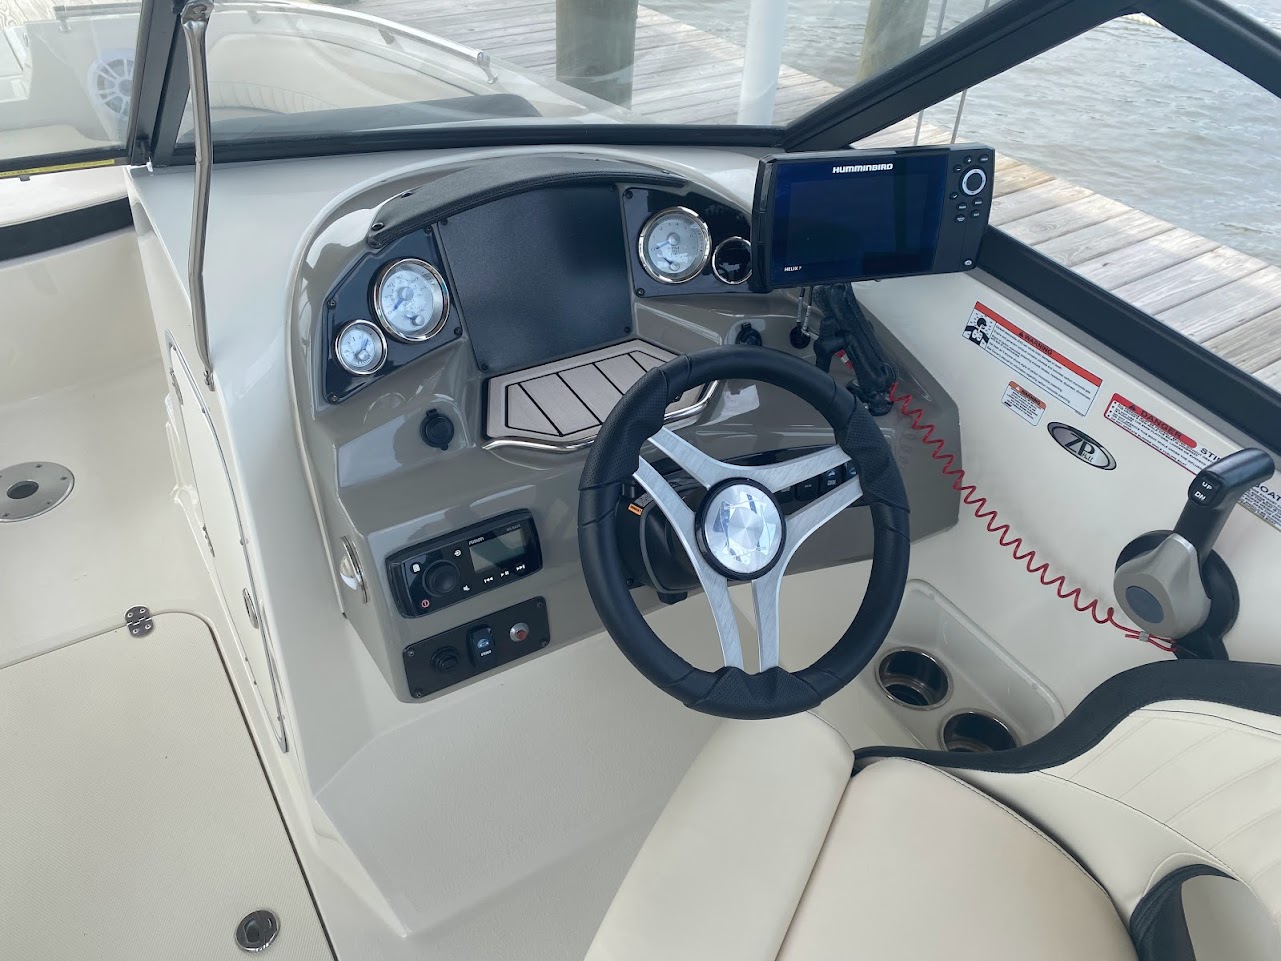 2022 Stingray 201DC Power boat for sale in Palm Coast, FL - image 13 